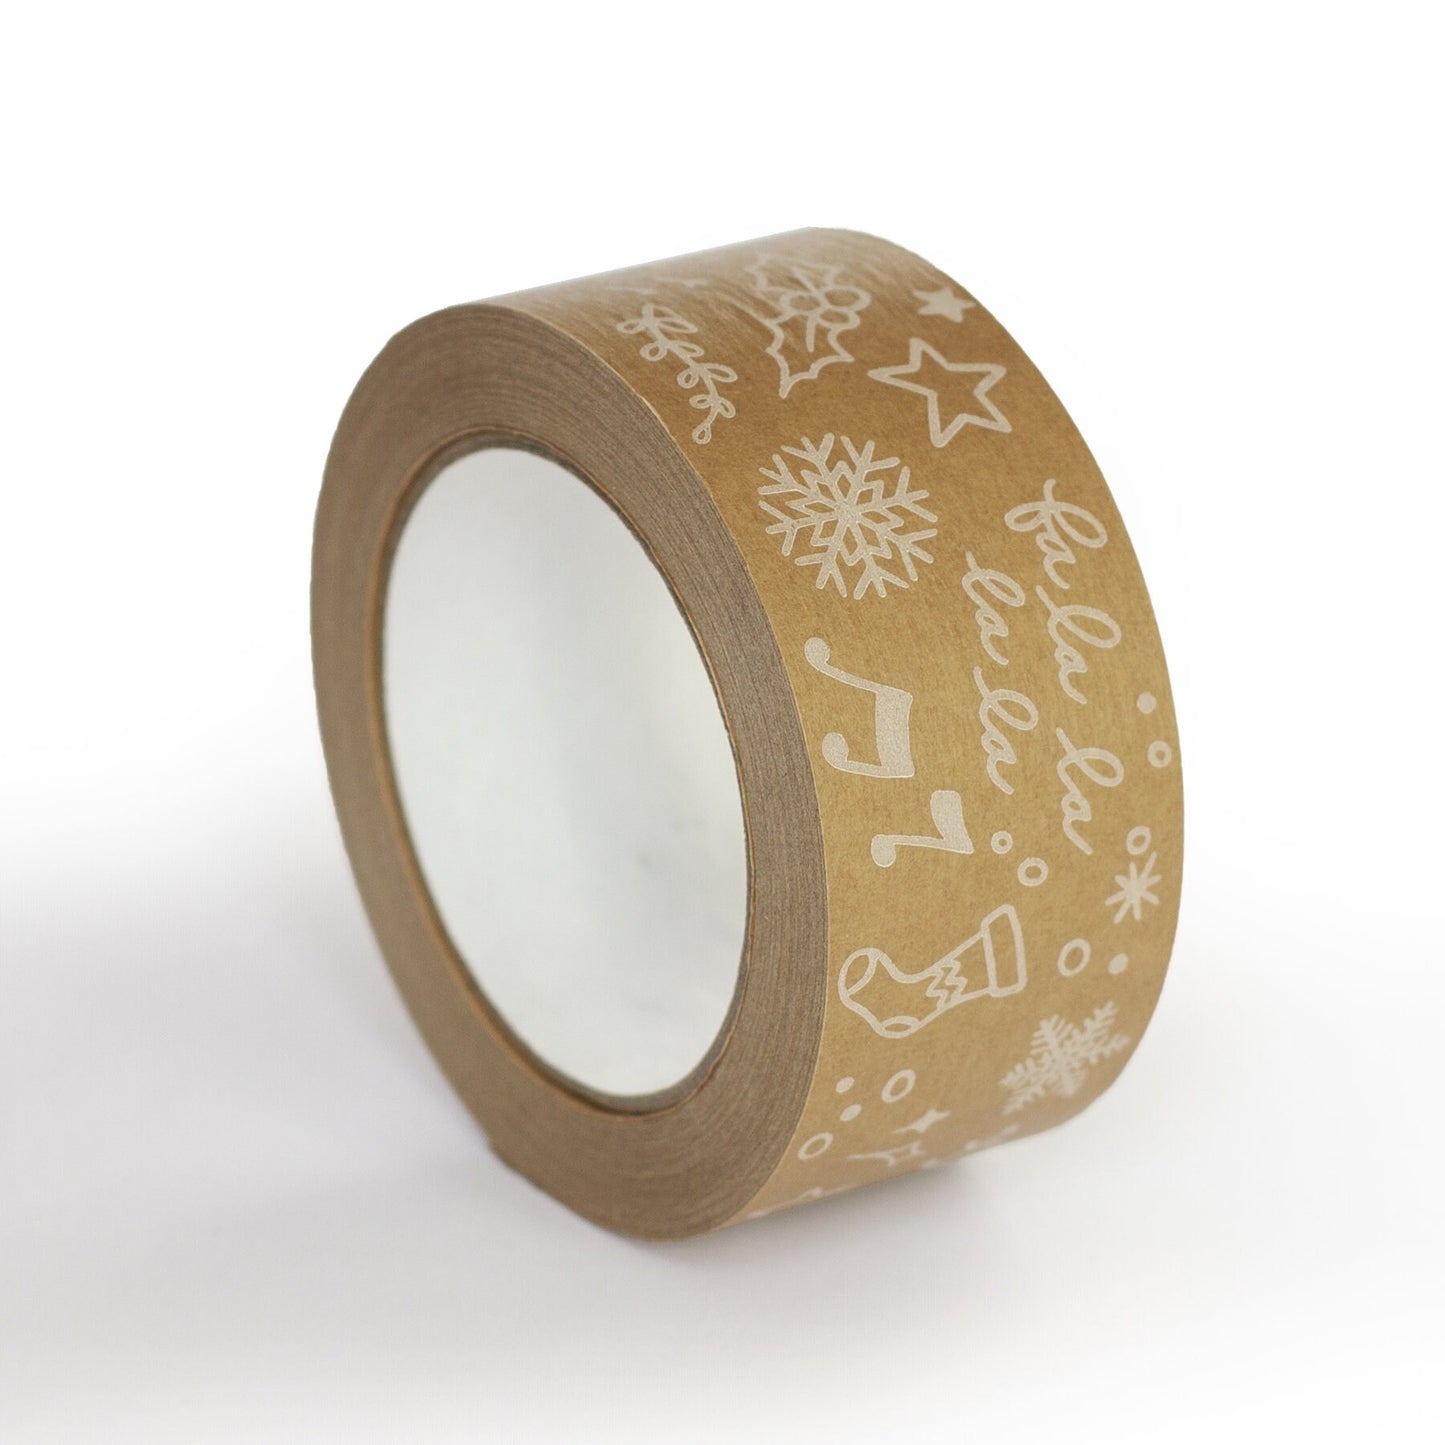 Christmas Packing Tape, Recycled Paper Christmas print, 50 metres length, 48mm width